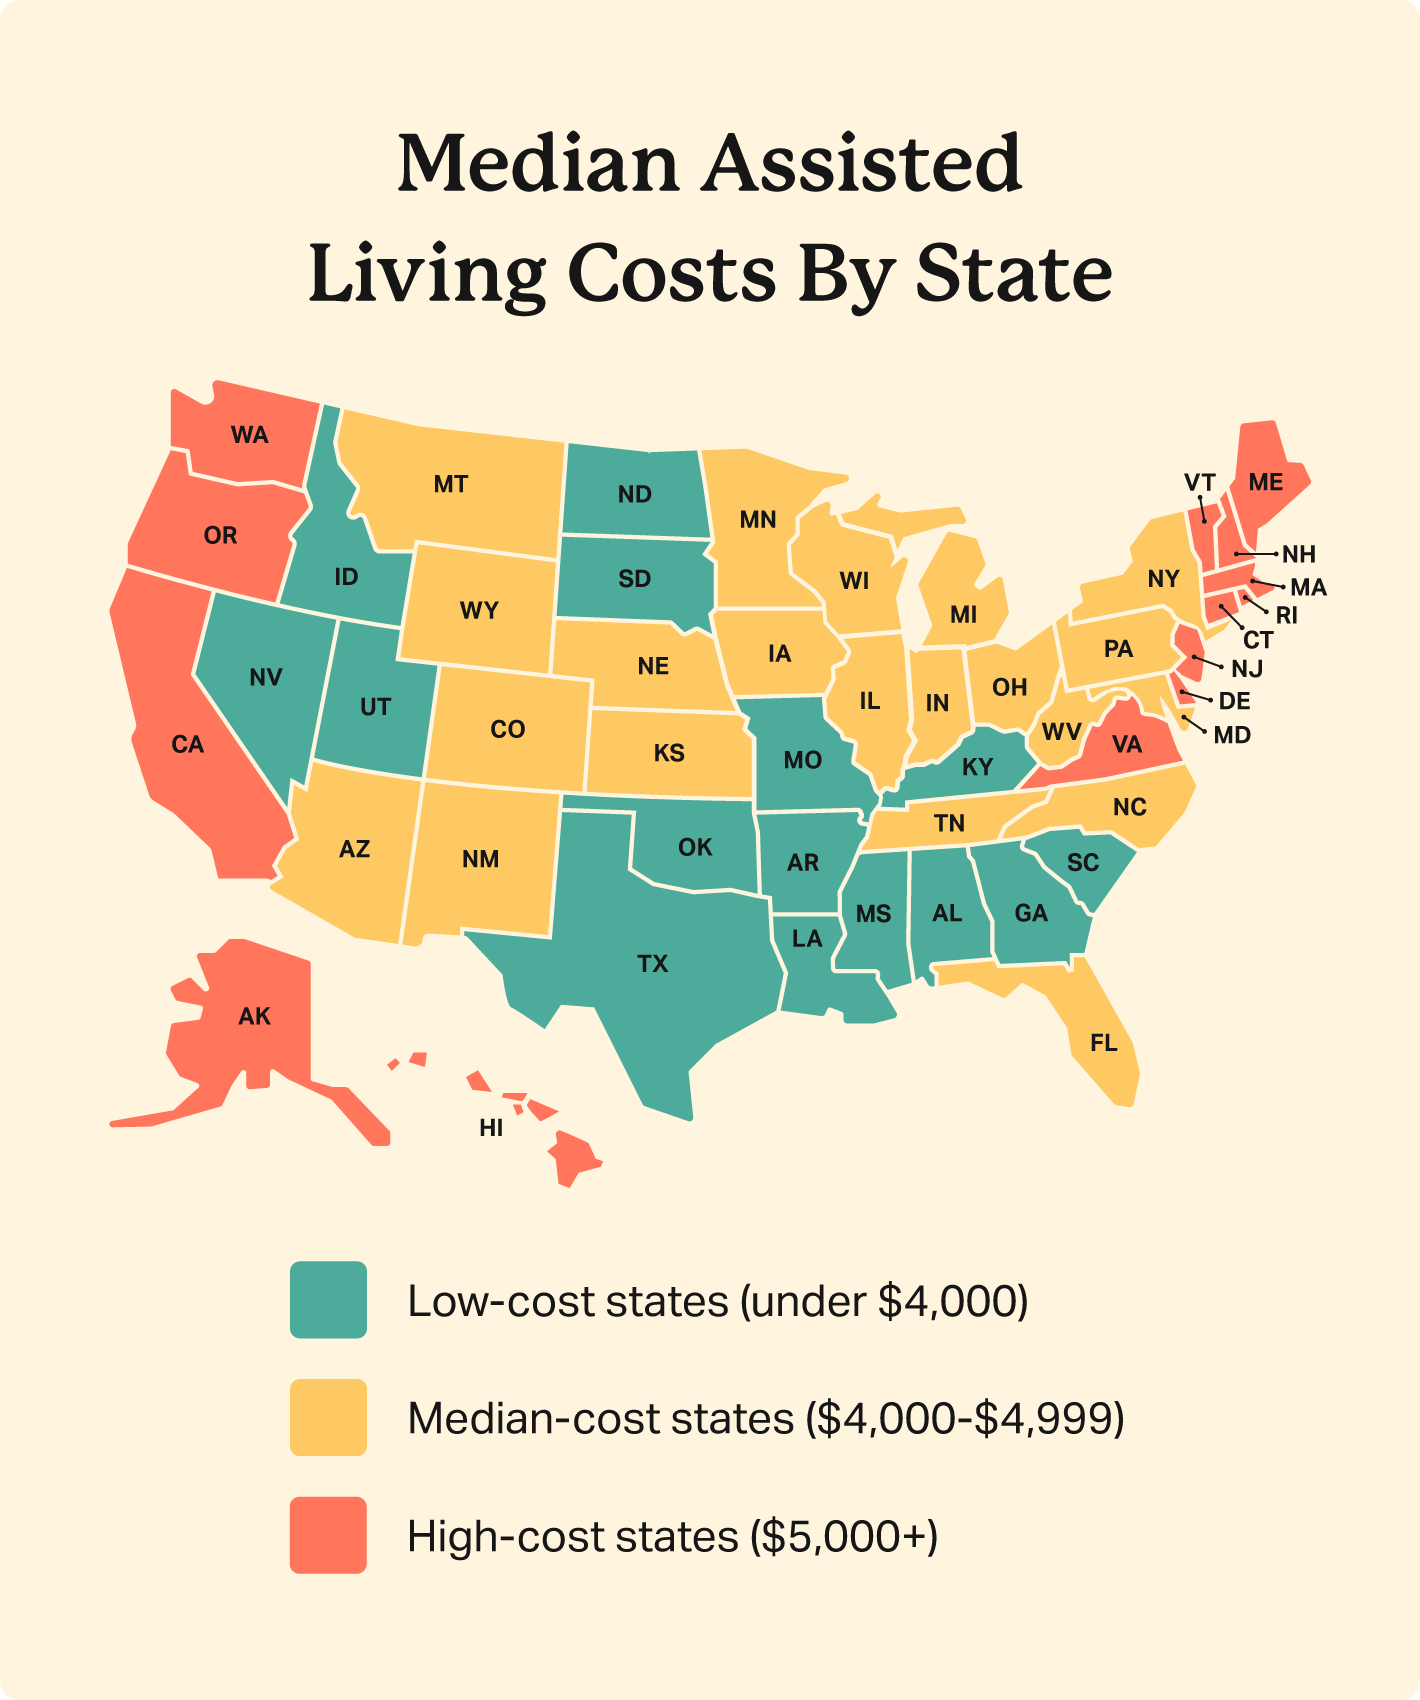 Color-coded map compares which states have low assisted living costs (<$4,000), median-cost states ($4,000-$4,999), and high-cost states ($5,000+).